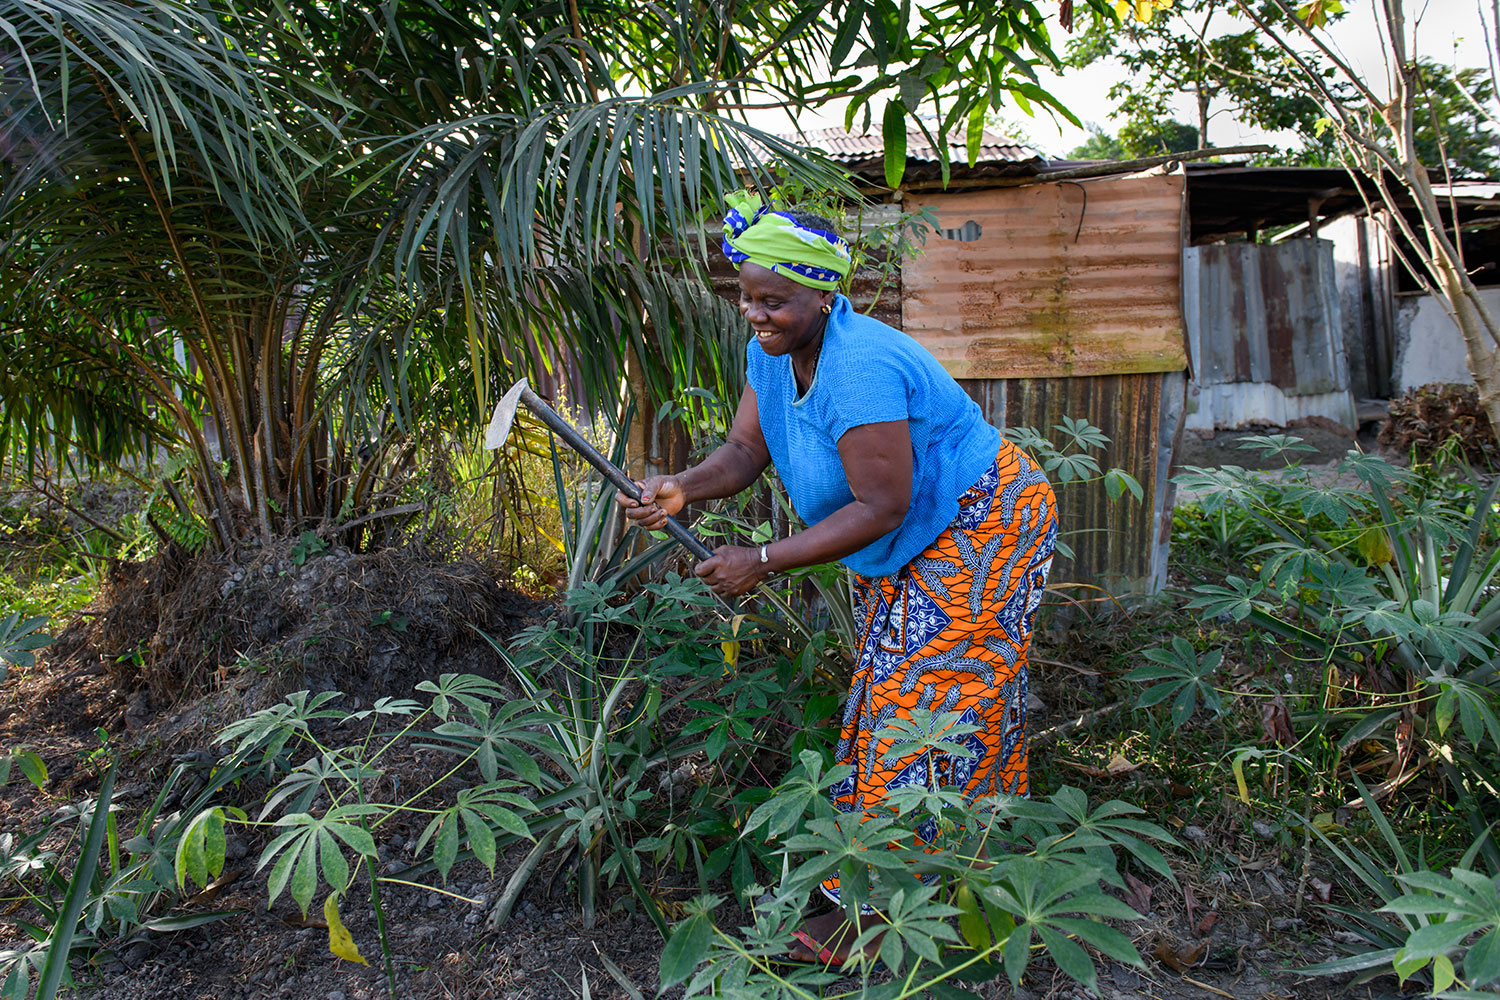 Kumba works in her Cassava field. Photo by Alison Wright.